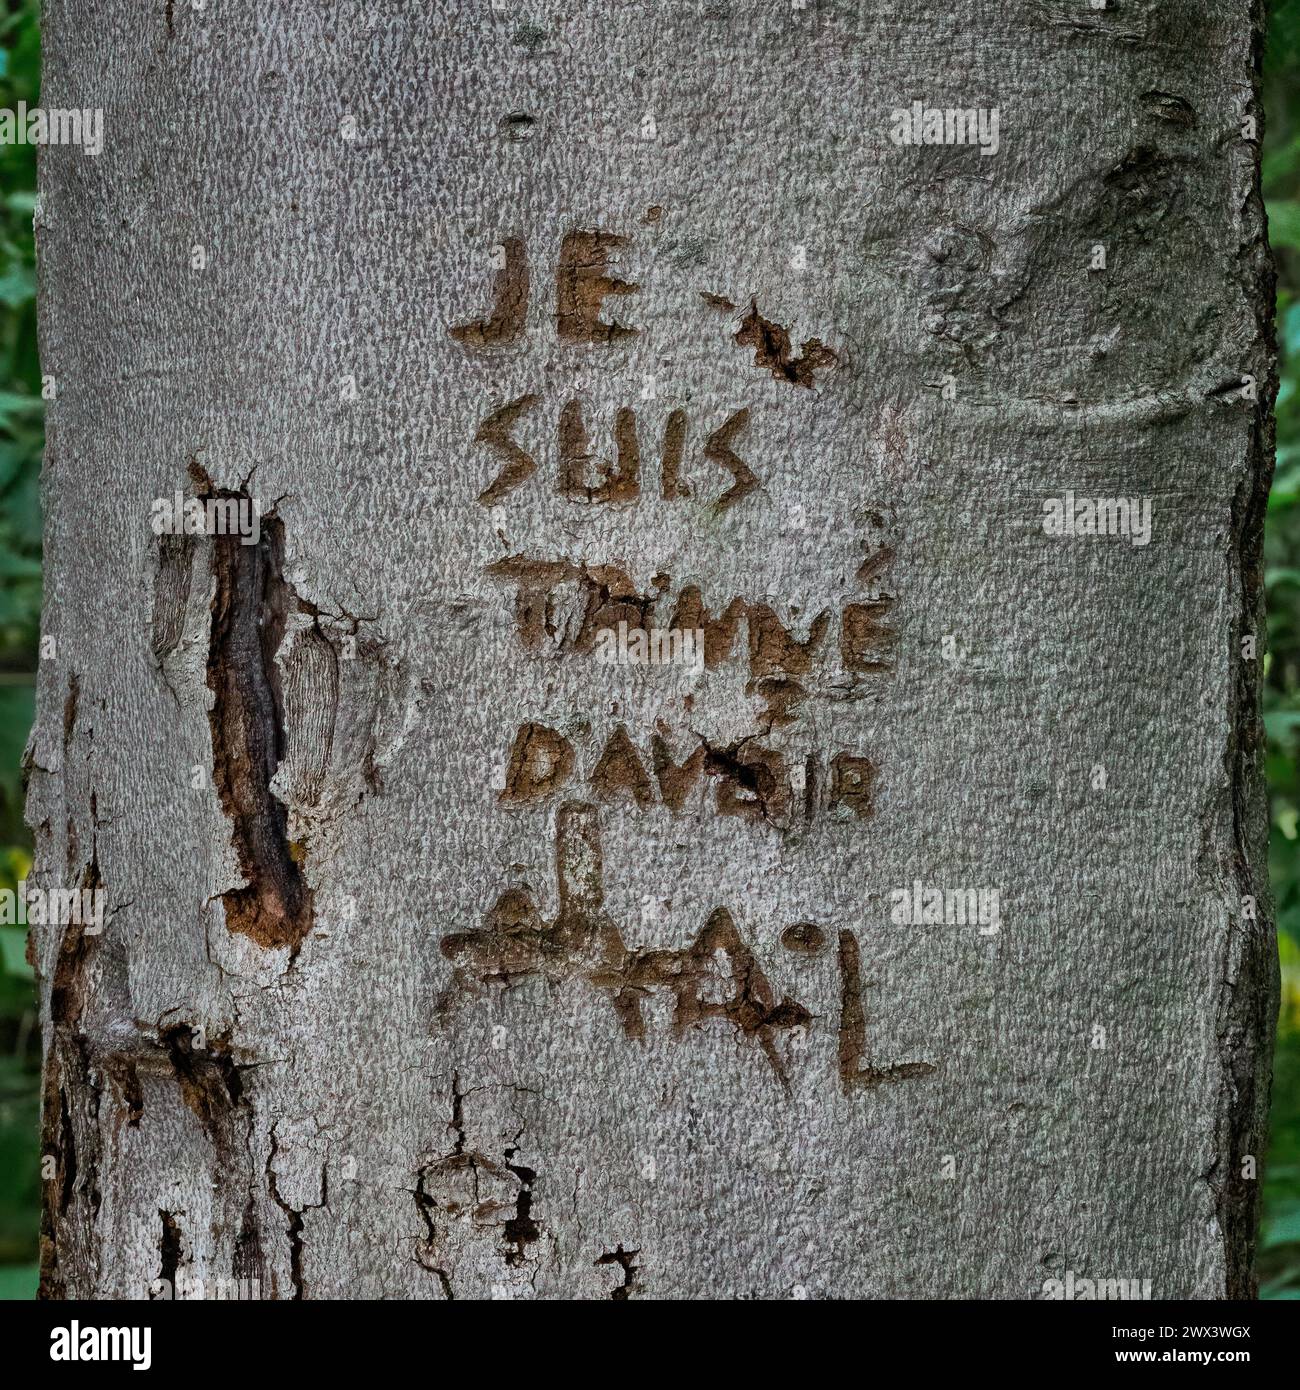 Bark of a tree with carved soul pain inscription in french Stock Photo